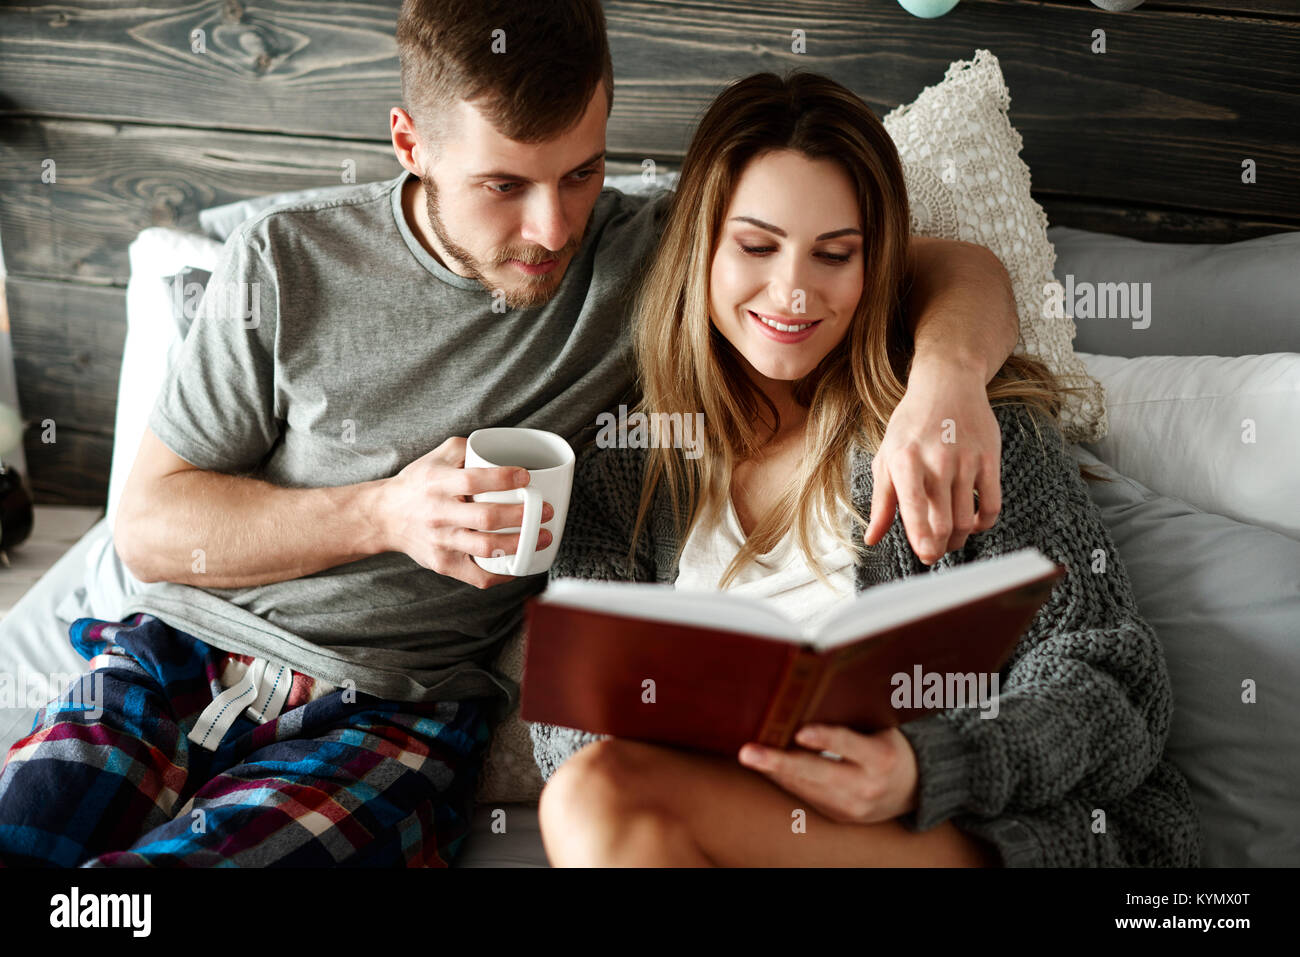 Affectionate couple spending time together at bedroom Stock Photo